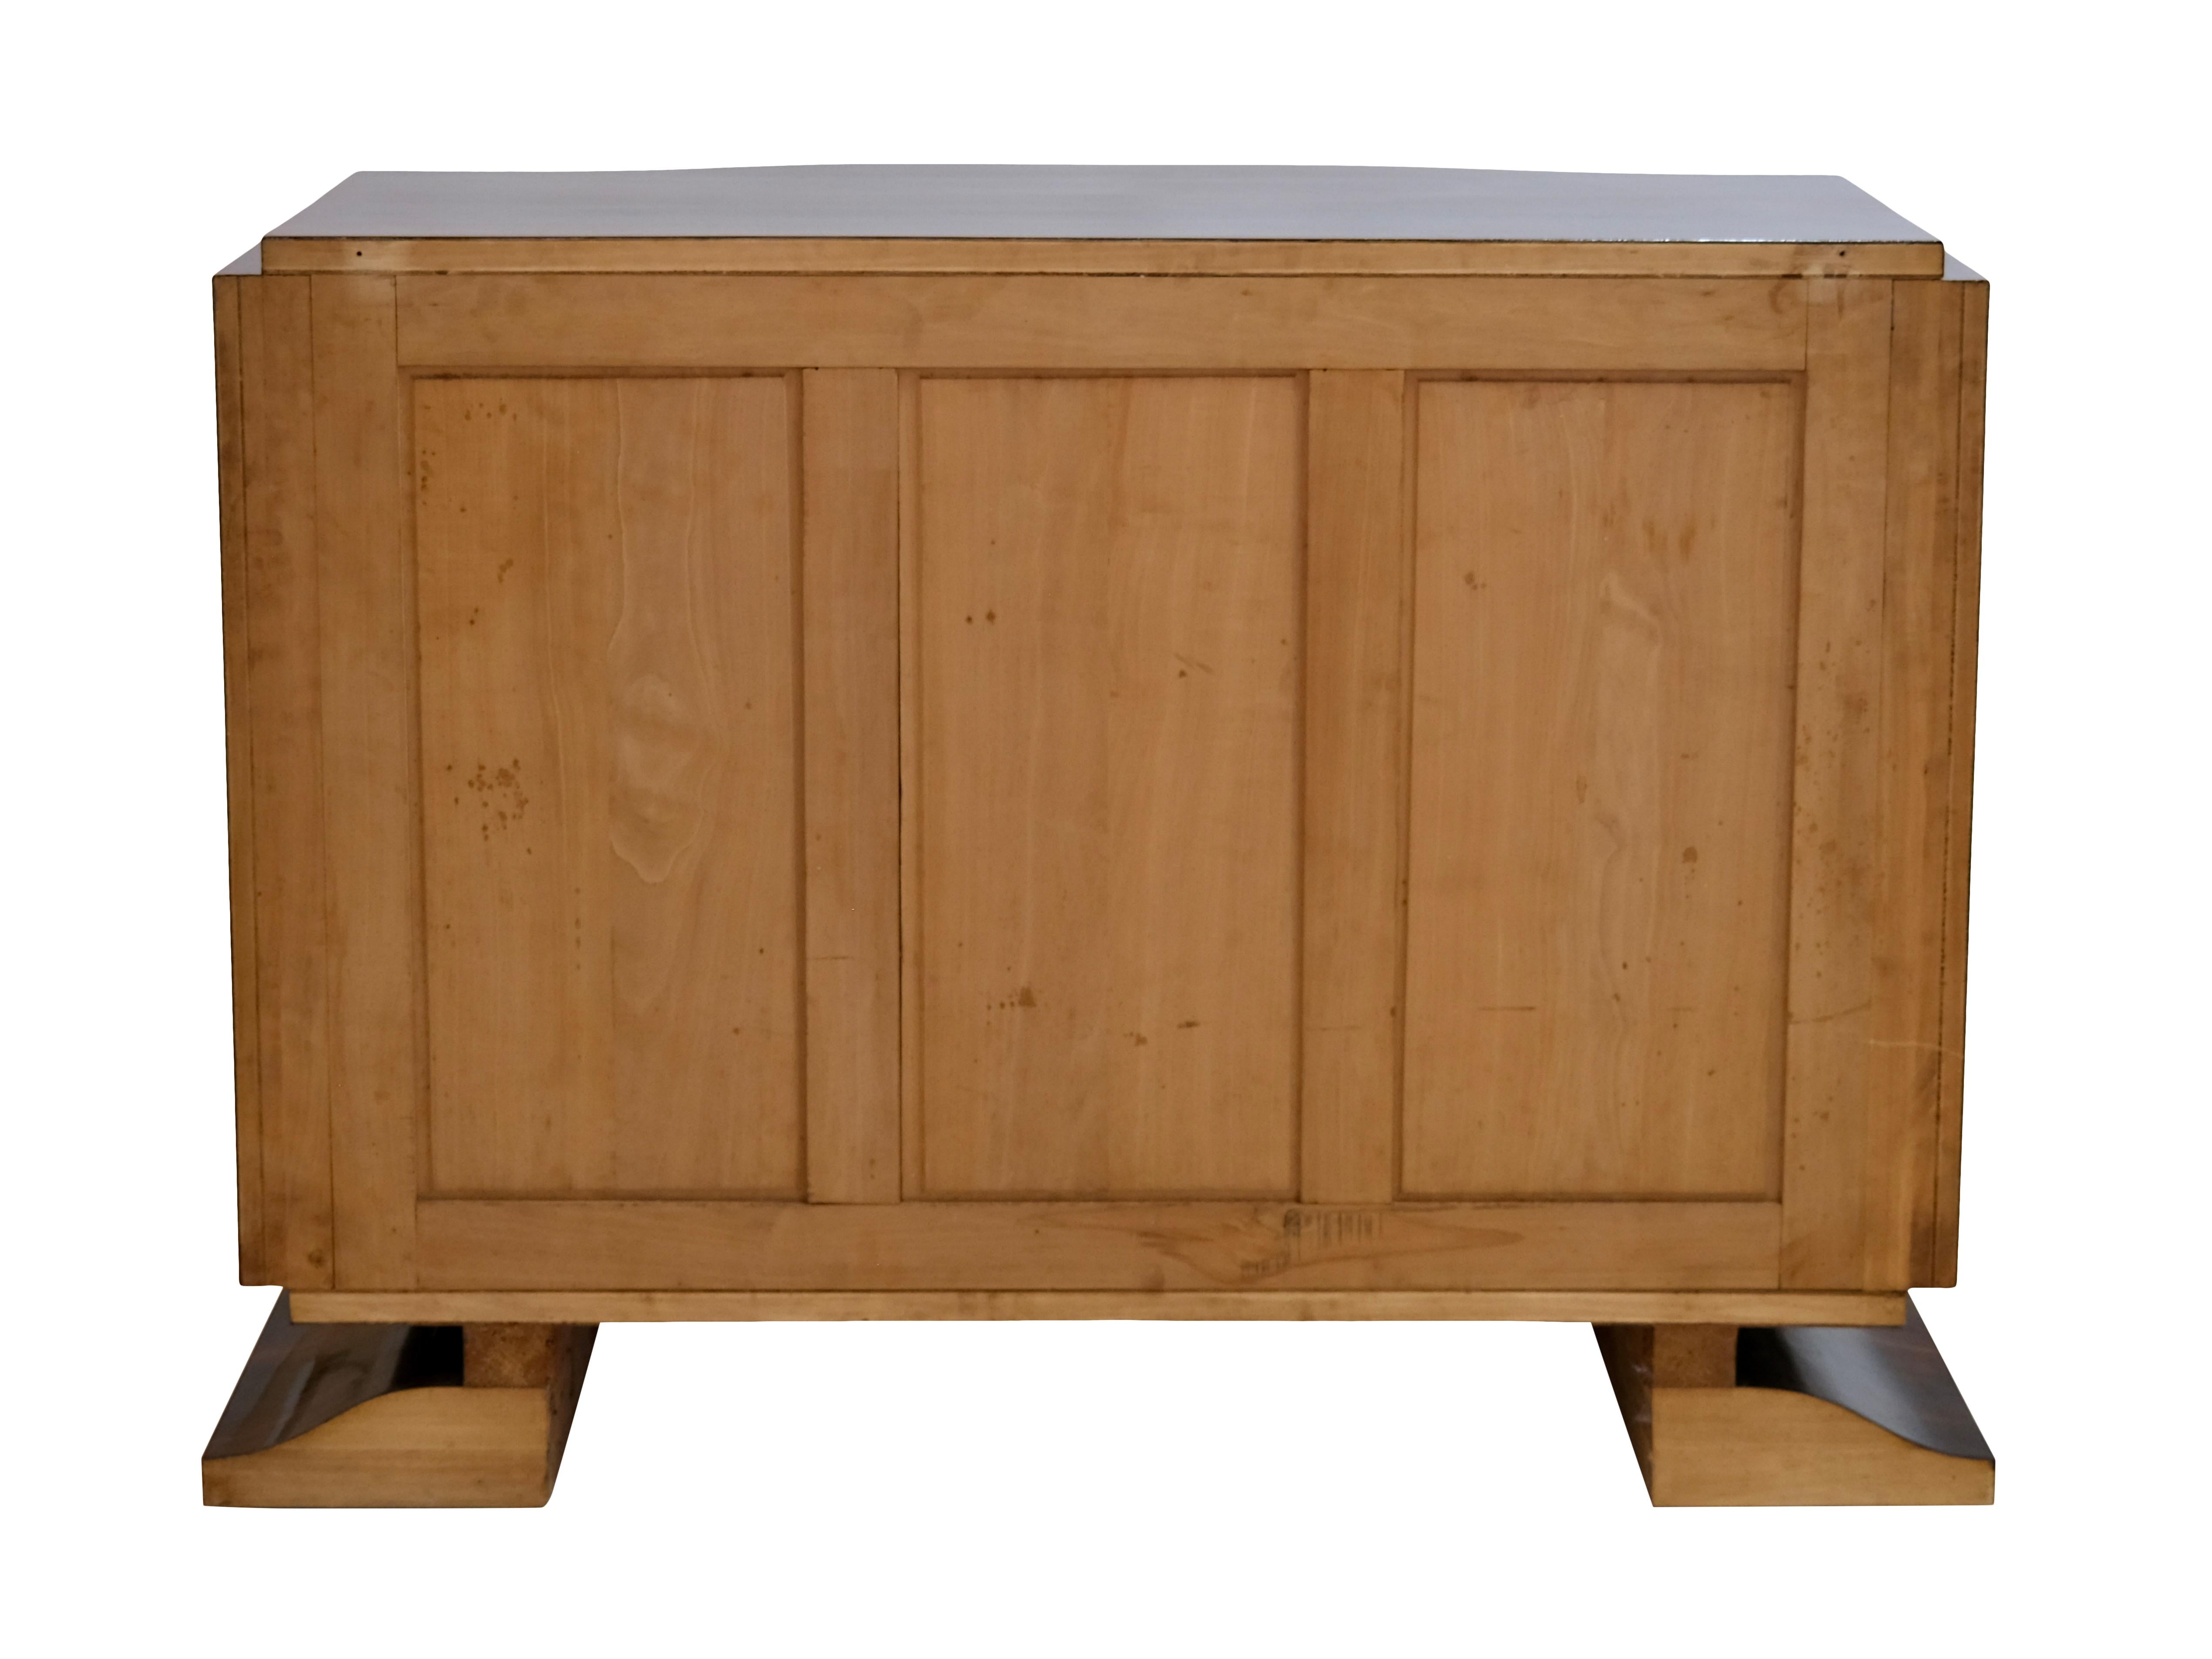 1930s French Art Deco Sideboard in Caucasian Nutwood with Sliding Fittings For Sale 2